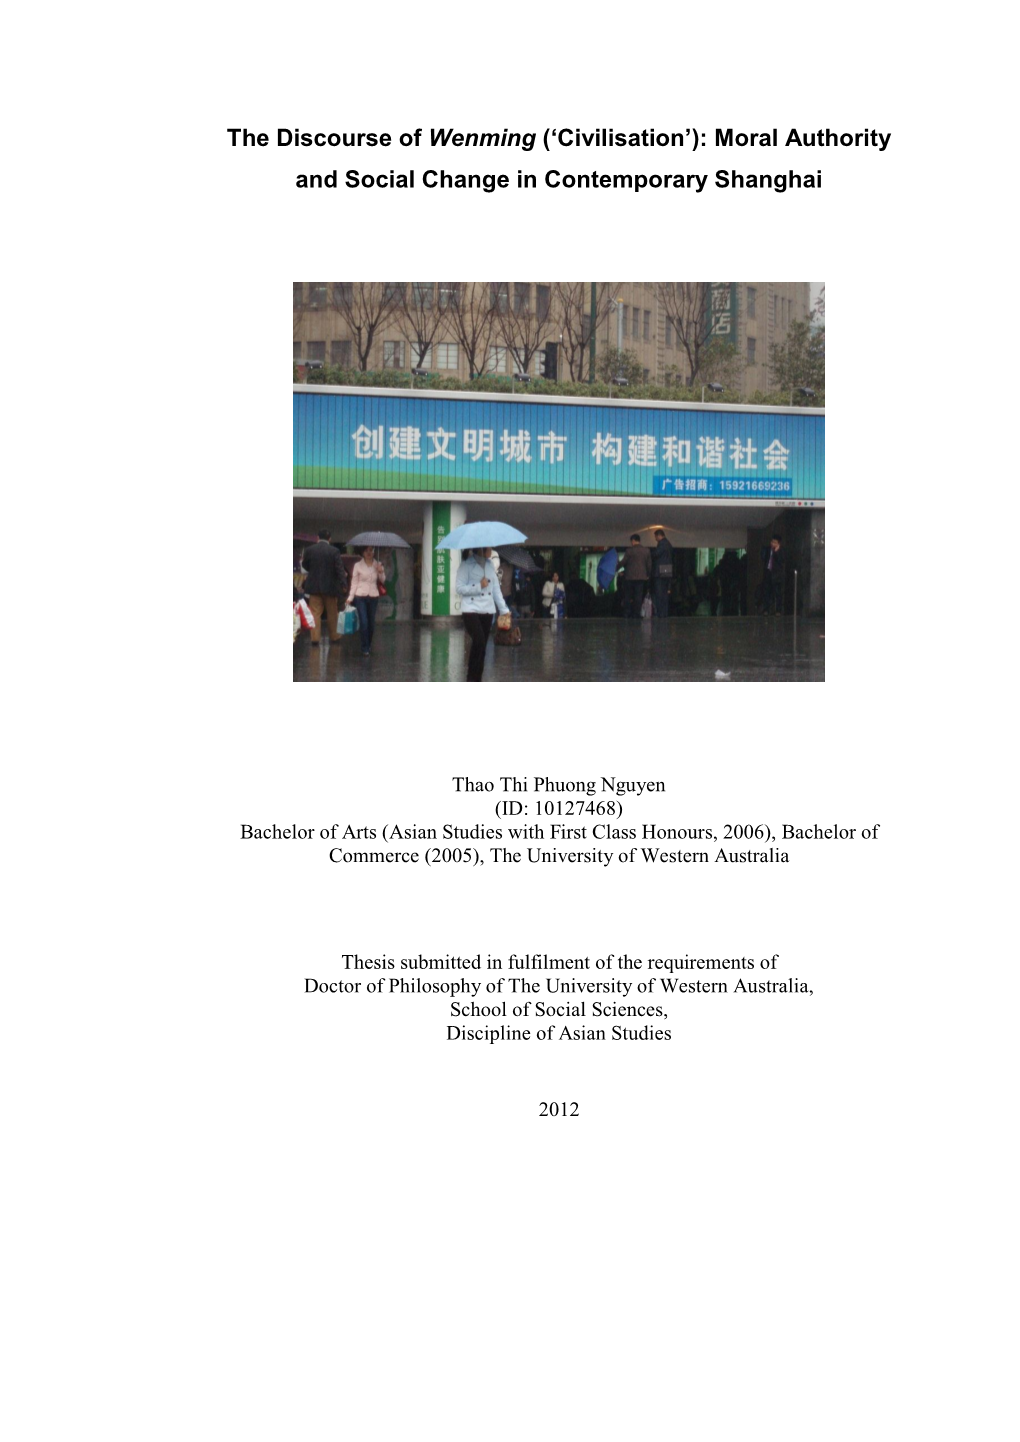 The Discourse of Wenming (‘Civilisation’): Moral Authority and Social Change in Contemporary Shanghai